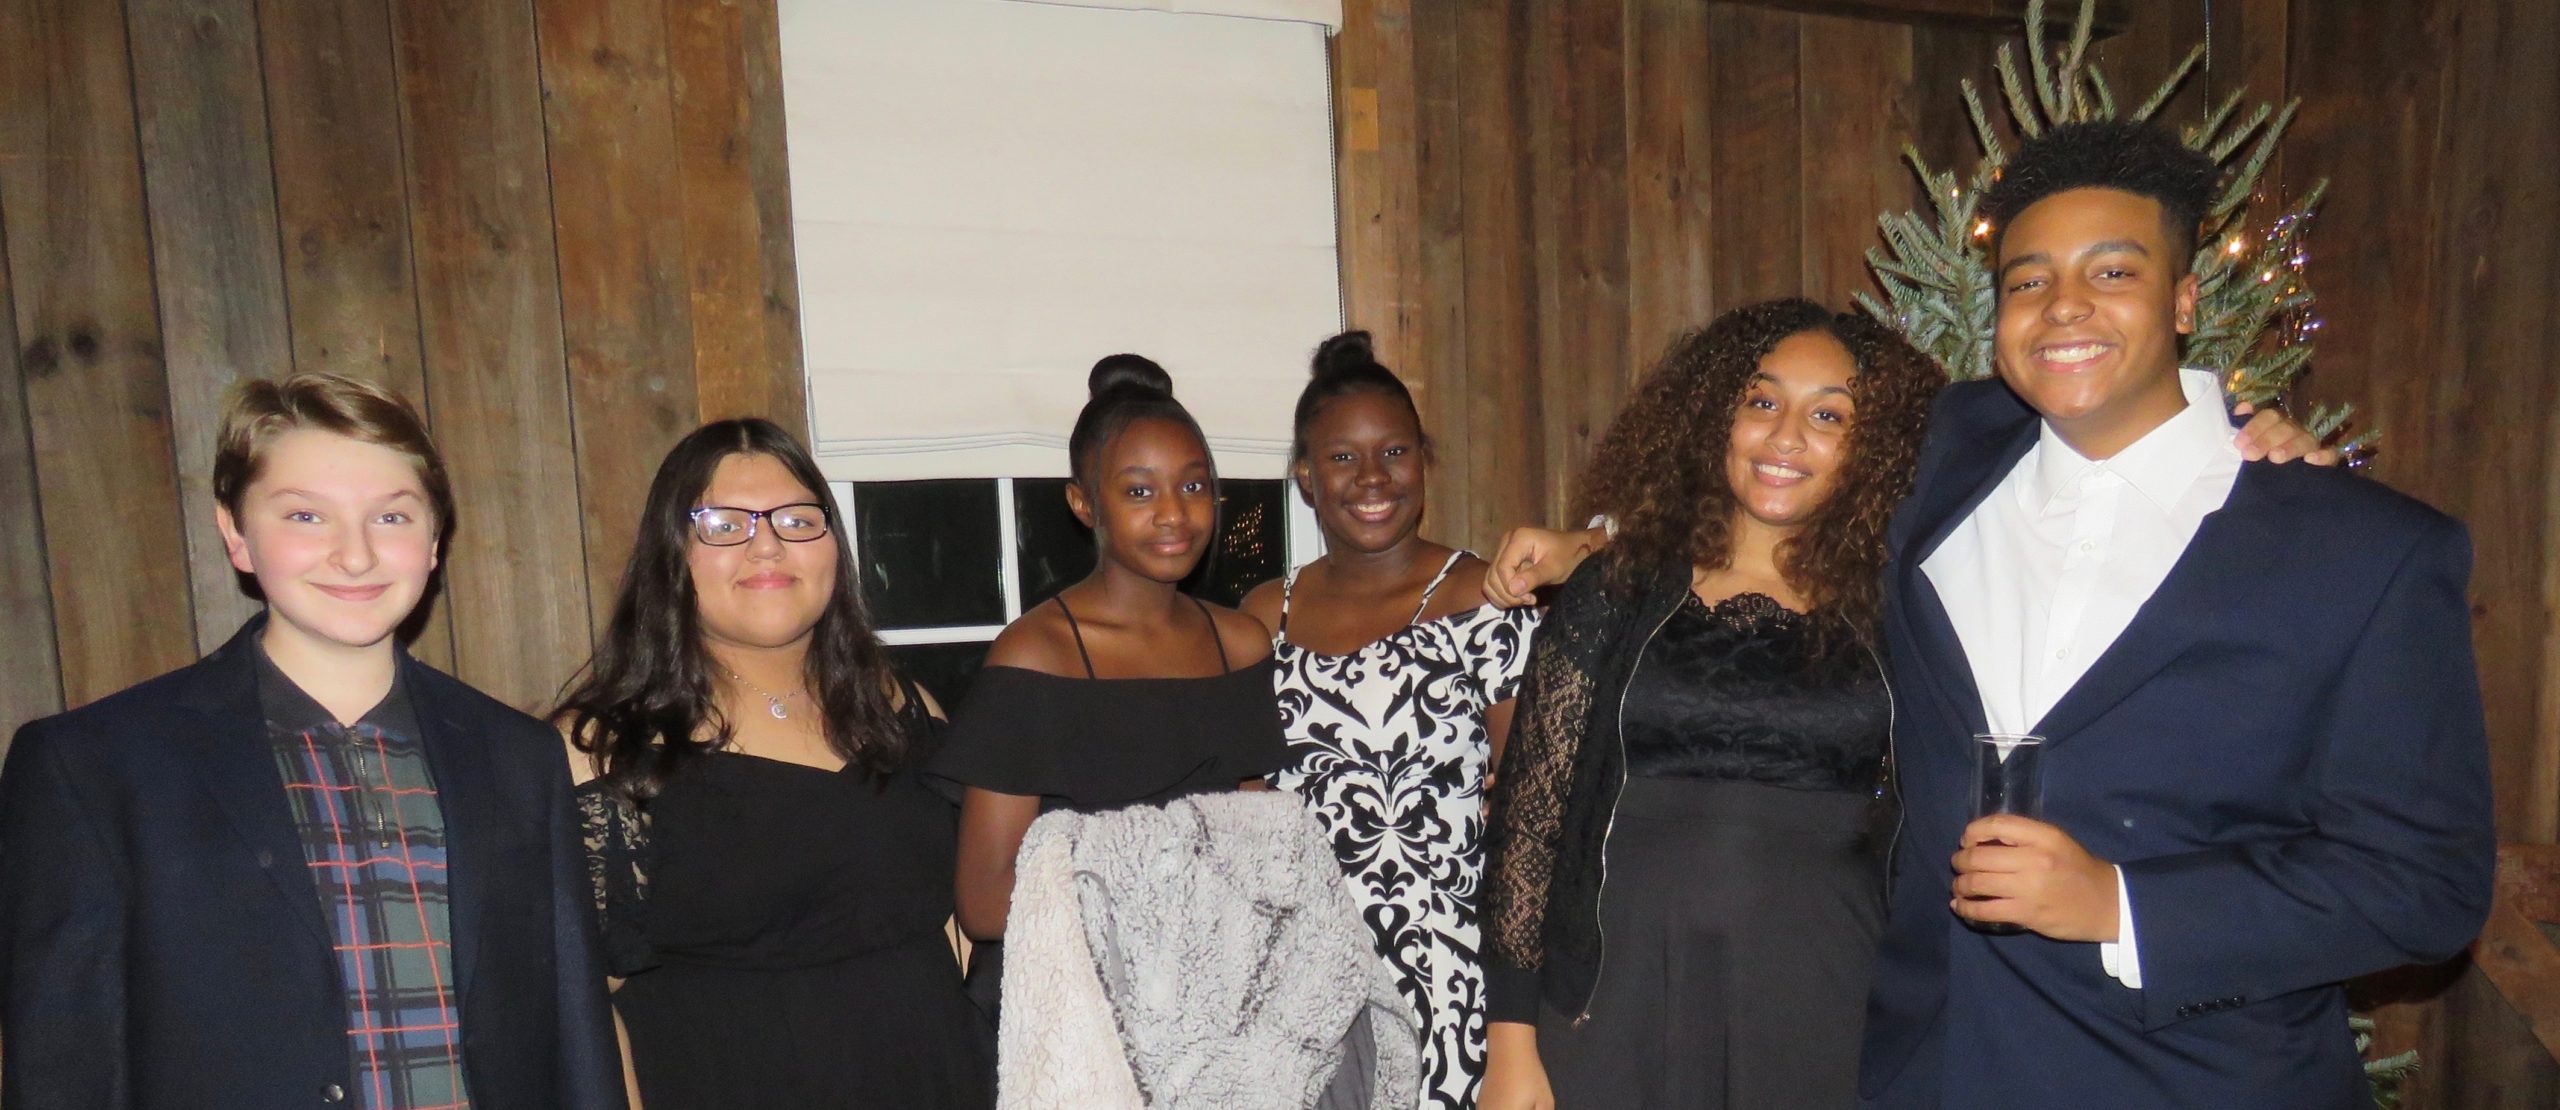 The Bridgehampton Childcare and Recreational Center held its annual holiday fundraising dinner at the Topping Rose House in Bridgehampton on December 15.  Among those attending were Sivia Loria and Bonnie Michelle Cannon, right, and a group of supportive teens. 